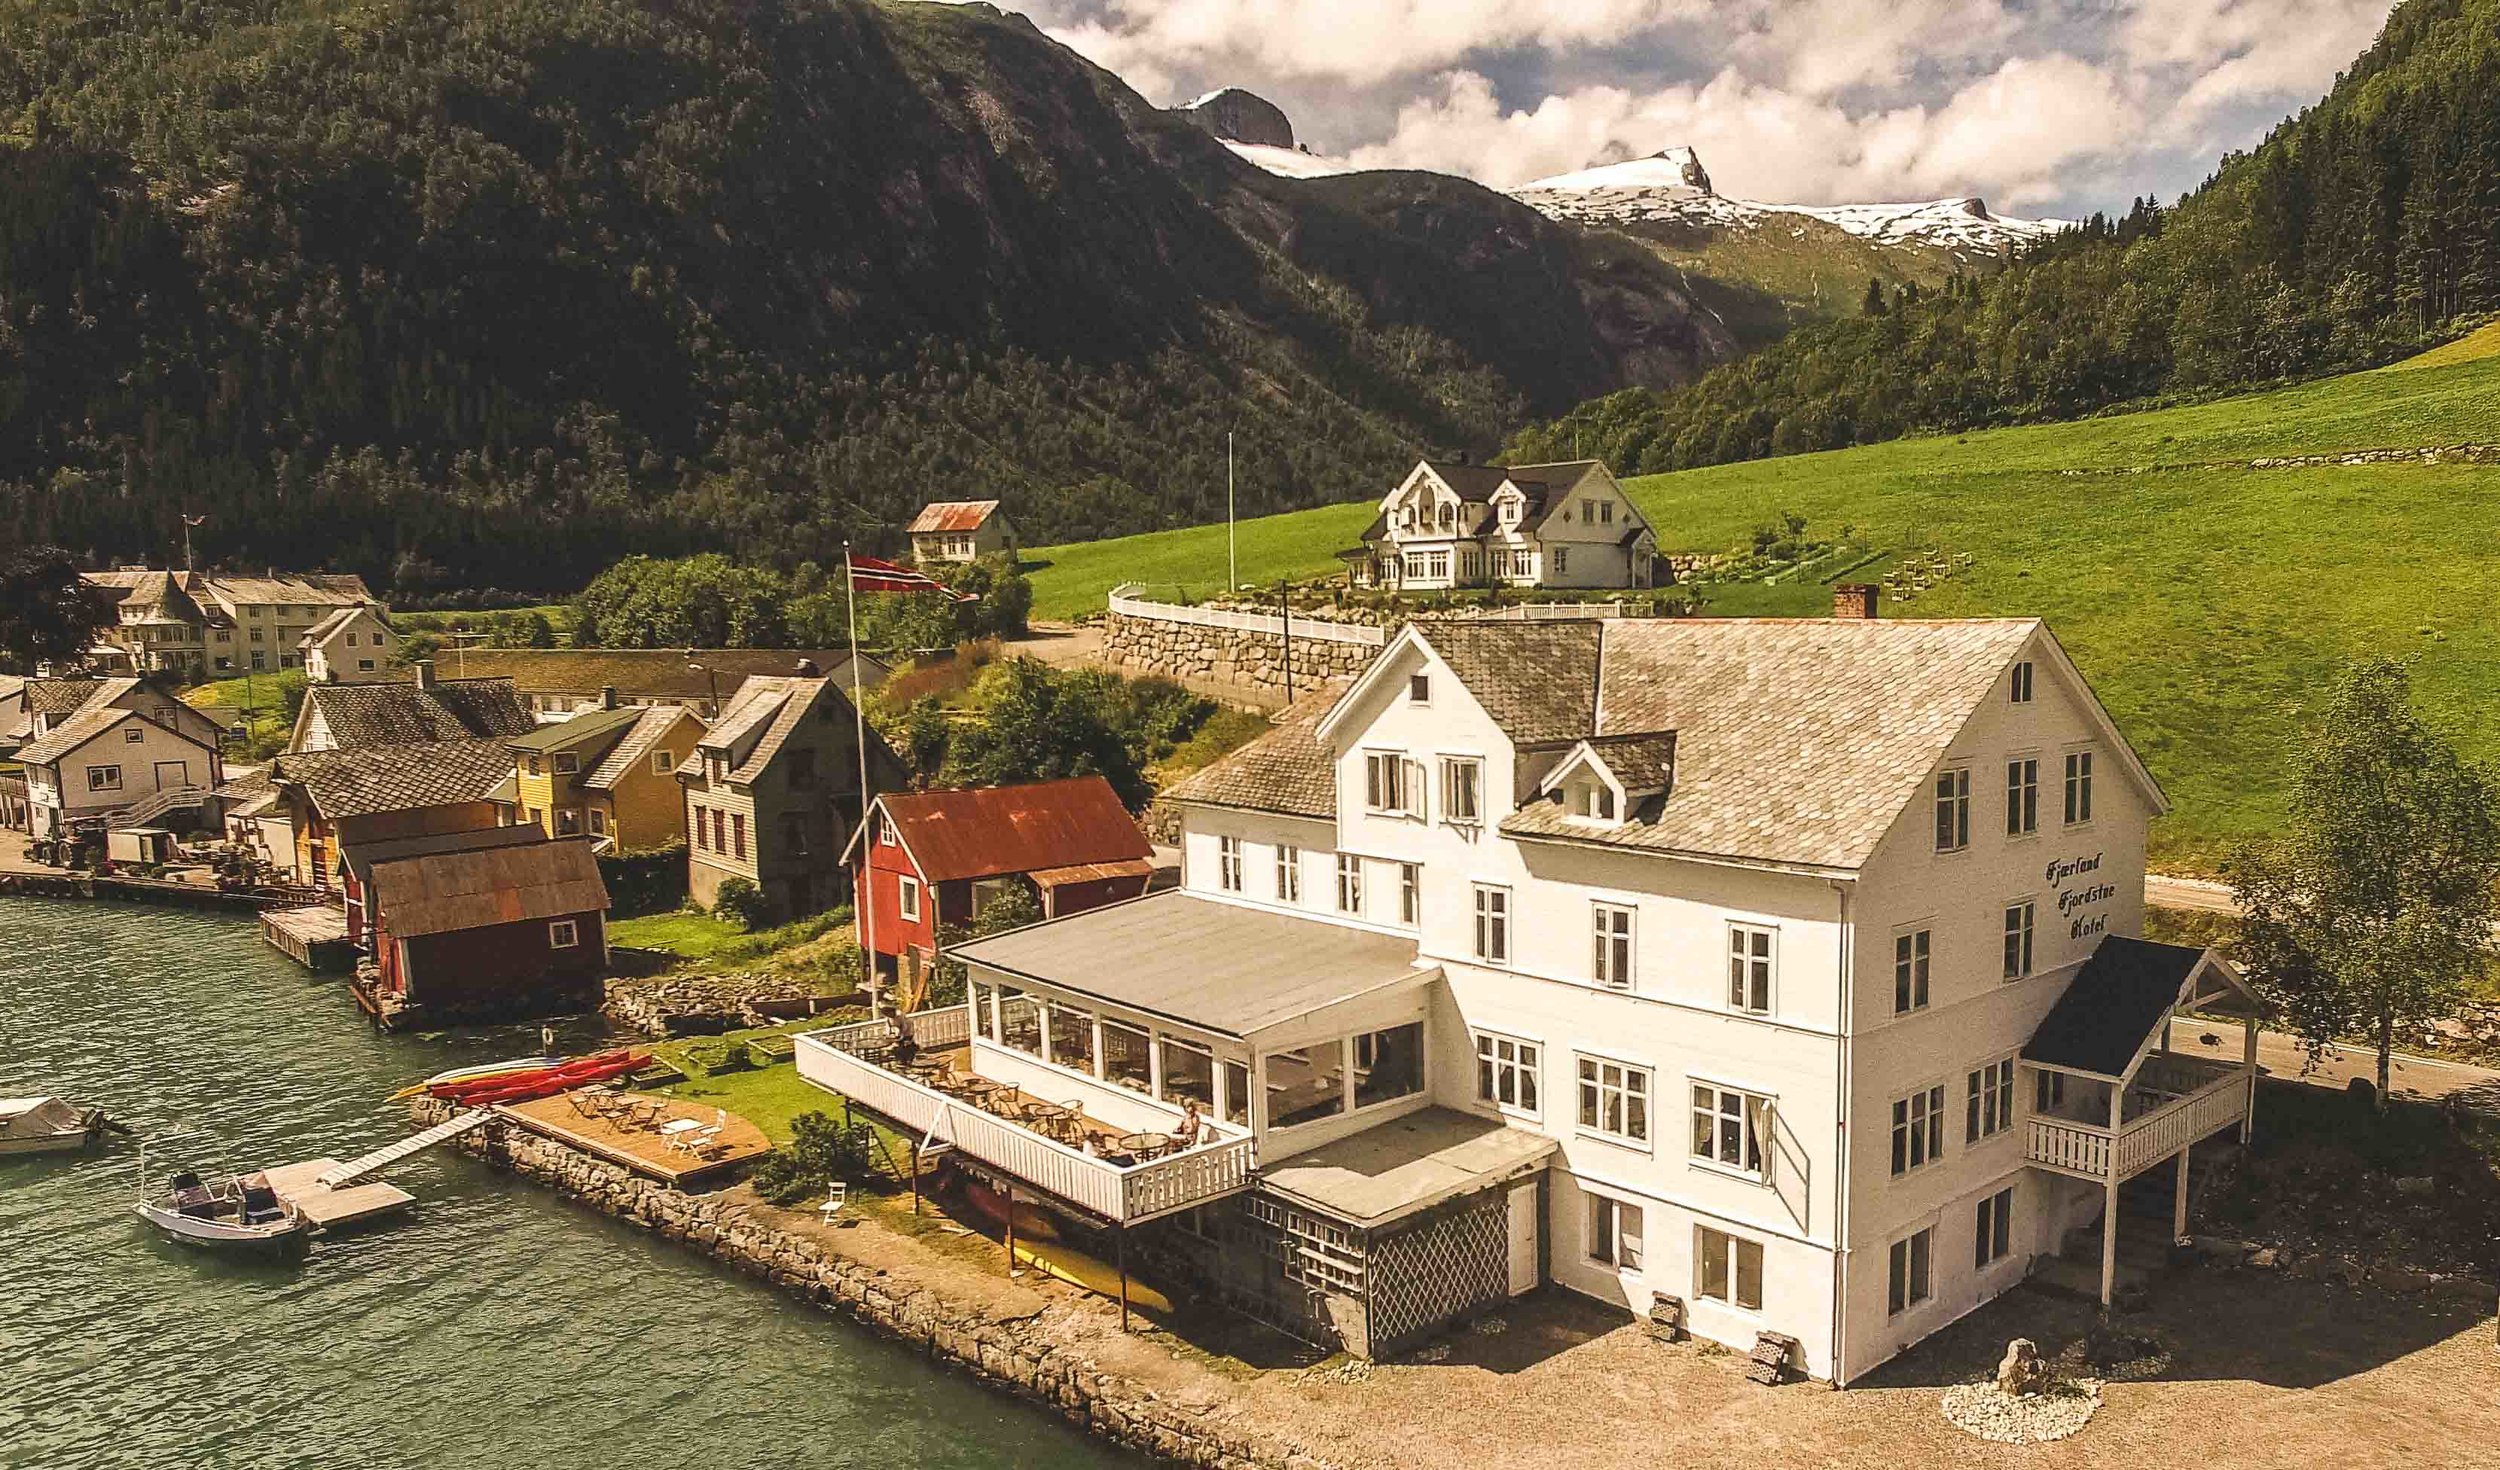 The hotel seen from the fjord